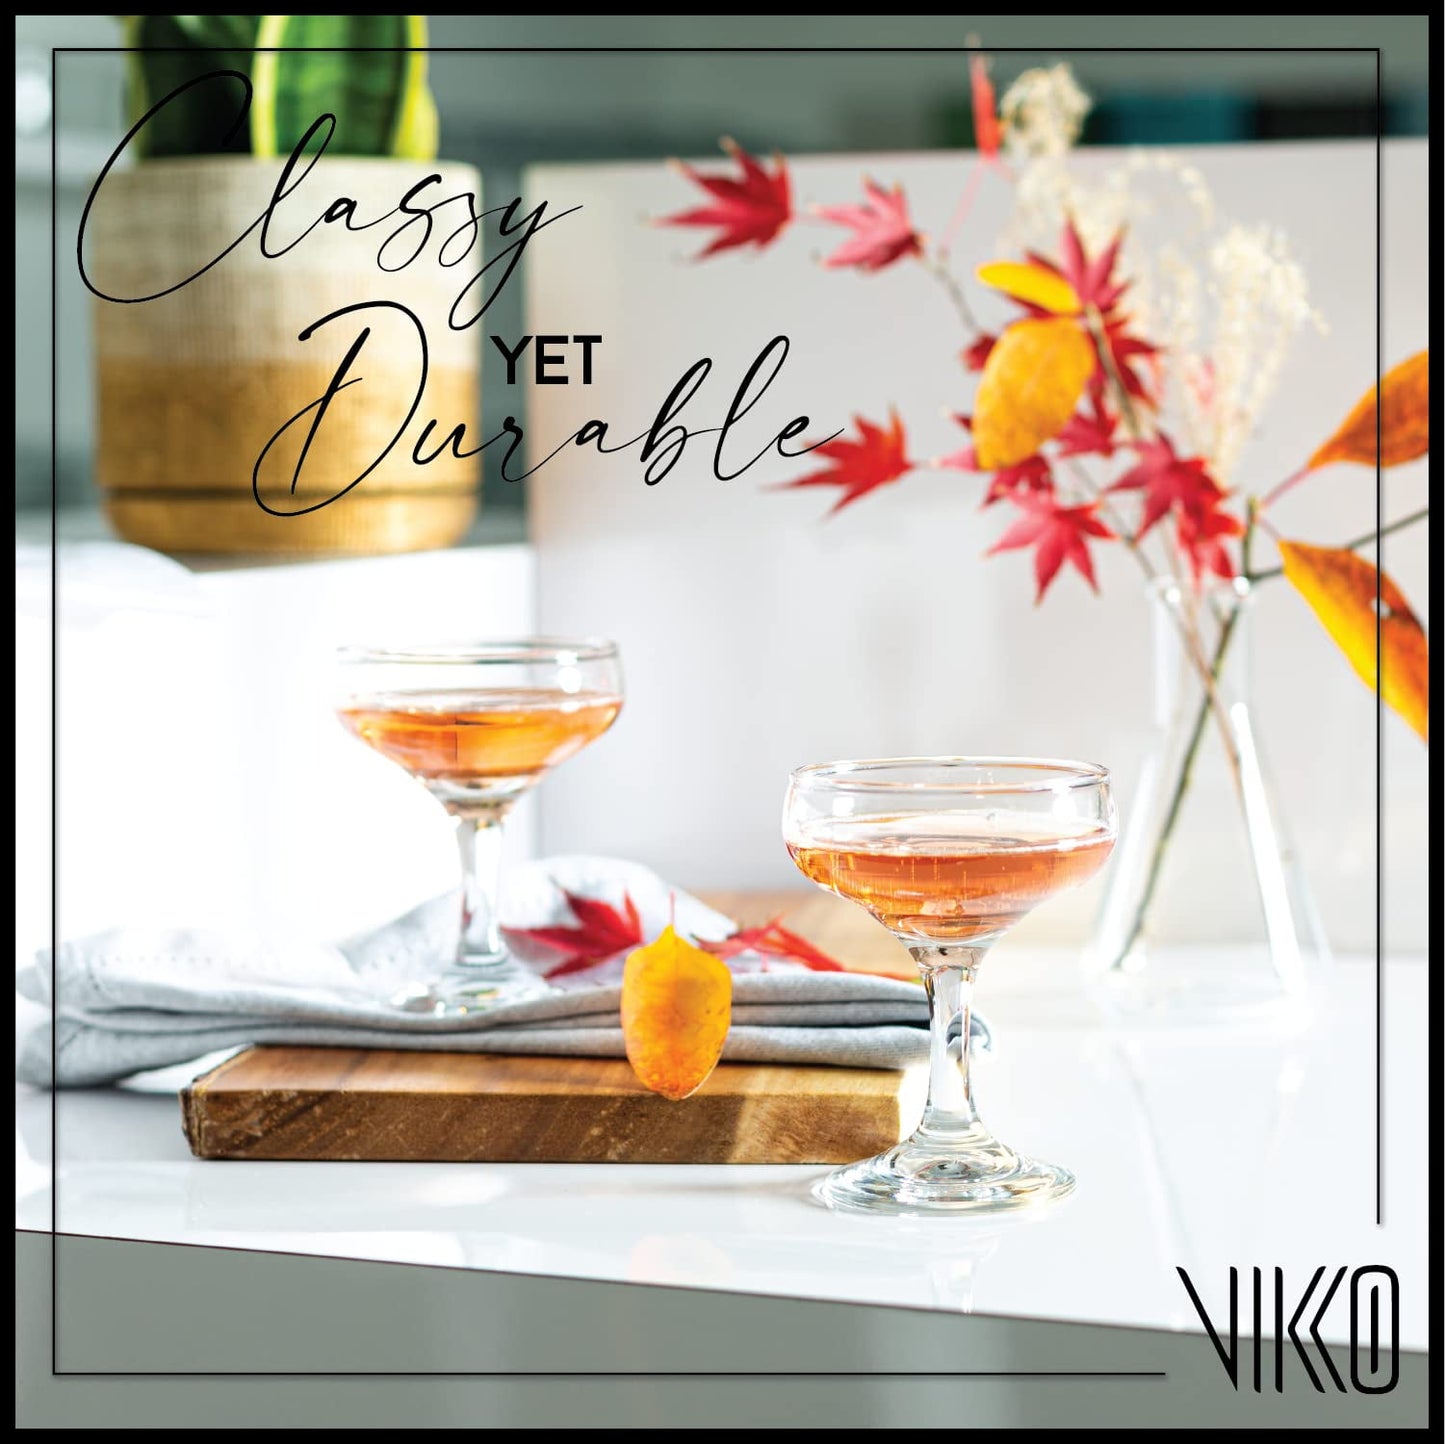 Vikko Cocktail Glasses Coupe Glass, Small Champagne Coupe Glasses, Manhattan Glasses For Cocktails, Classic Martini Glasses, Vintage Coupe Cocktail Glass, Sparkling Wine Saucers Set of 6, 5.2 Oz